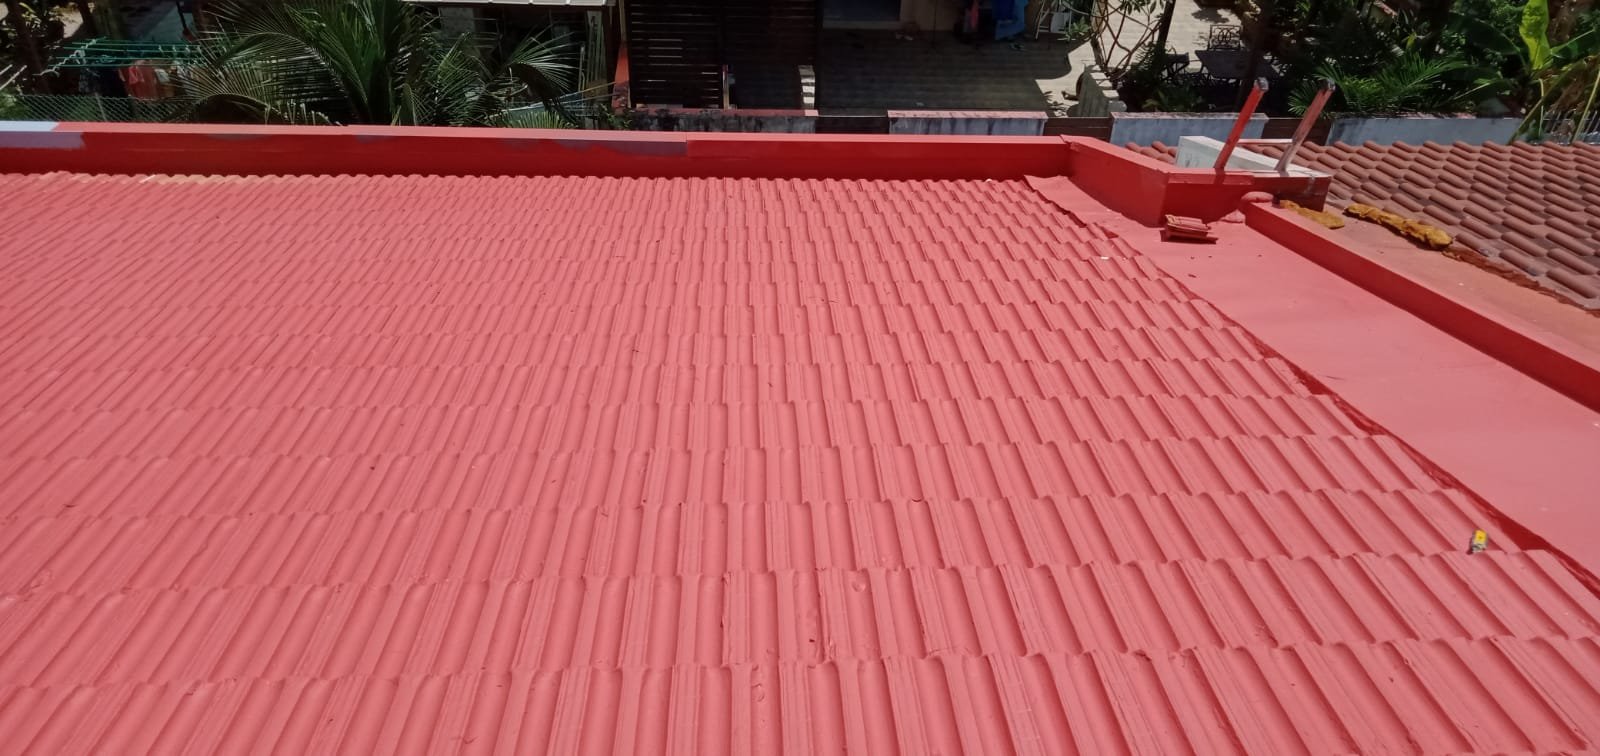 Pitch-clay tiles roof coating #2